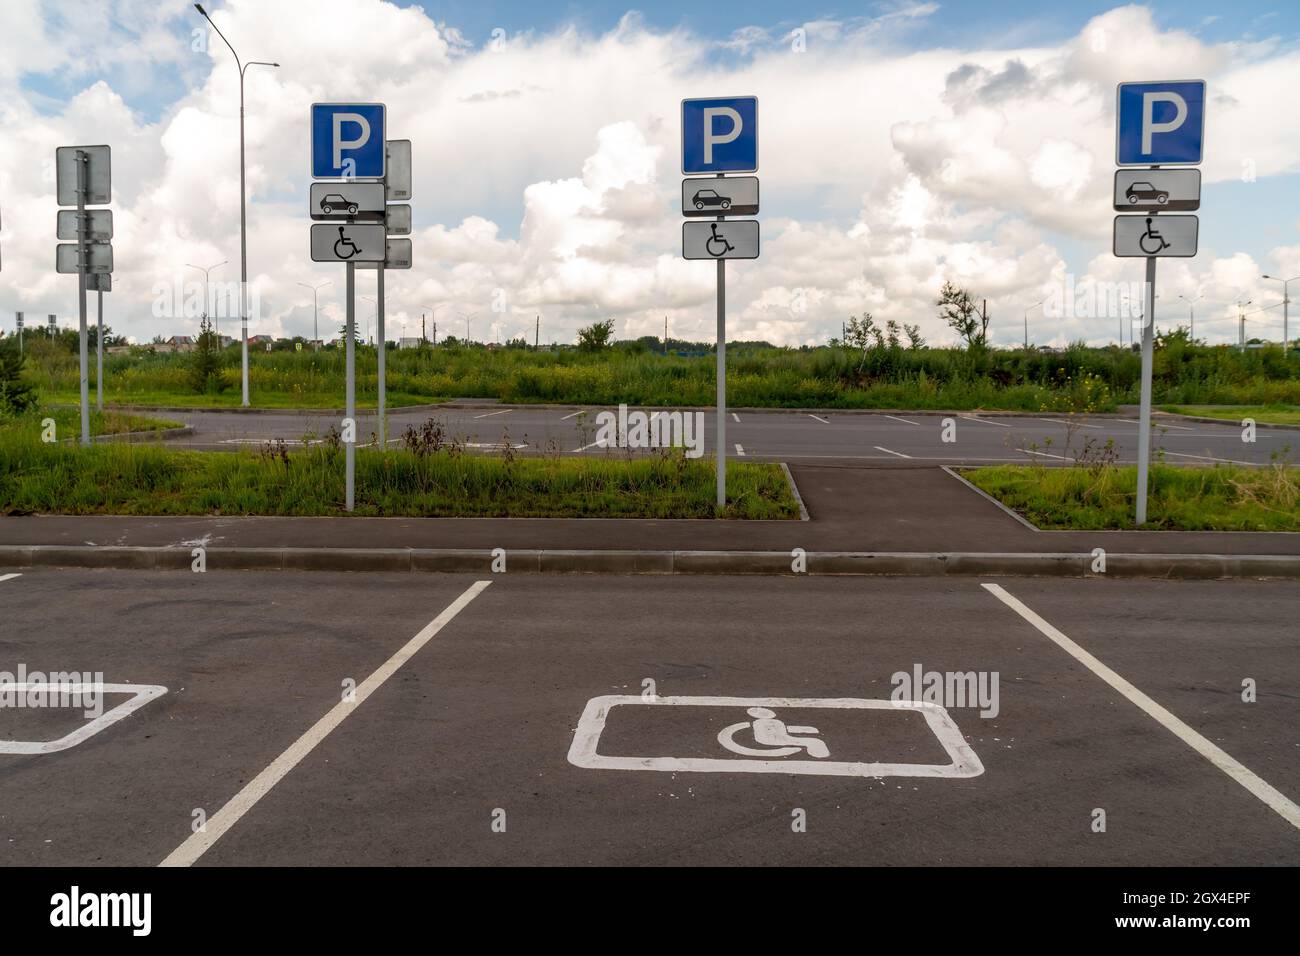 Parking spaces for disabled people with road signs, demarcated on the asphalt. Stock Photo